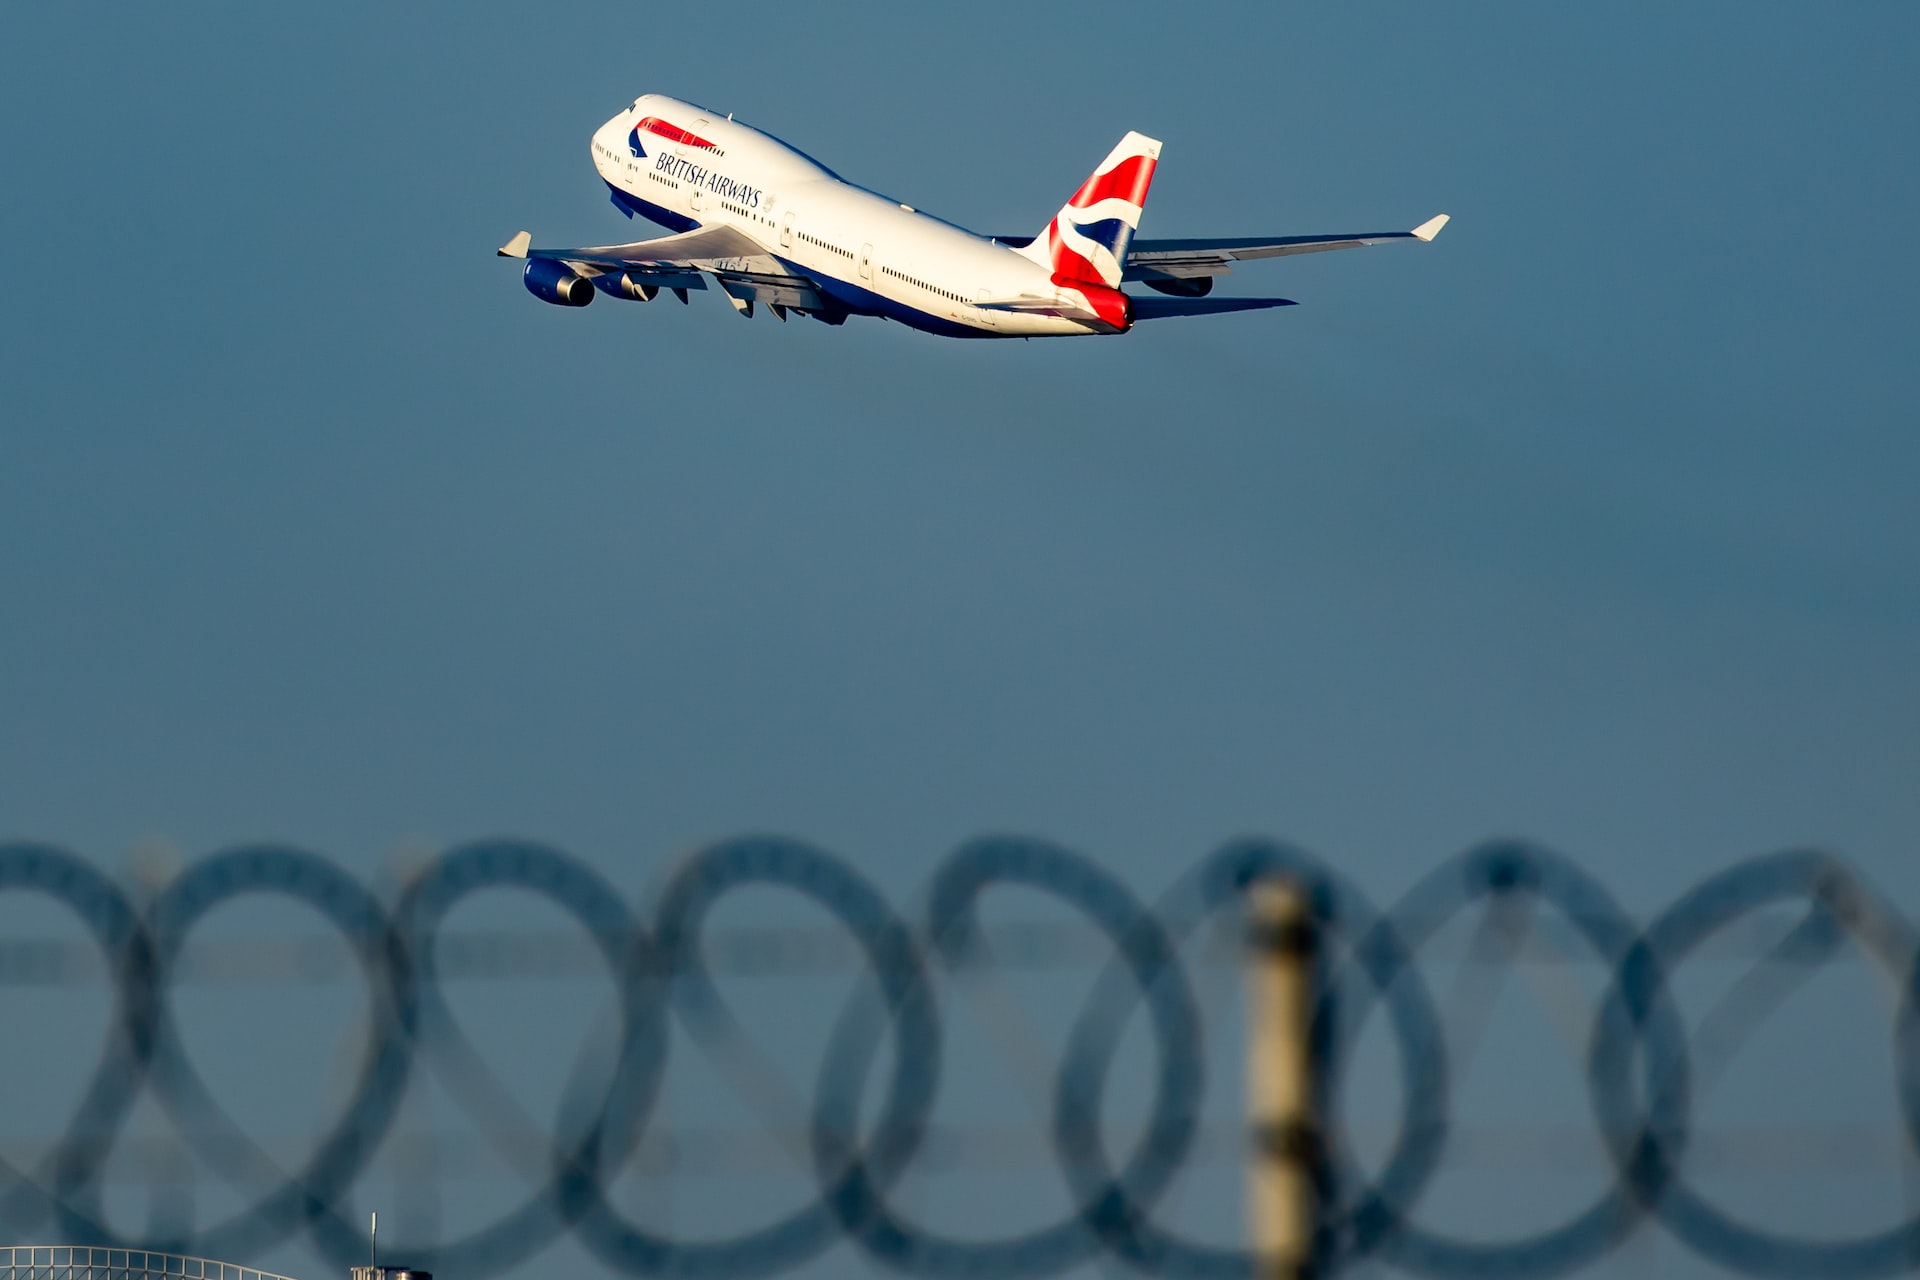 British Airways aircraft taking off from an airport behind a fence.